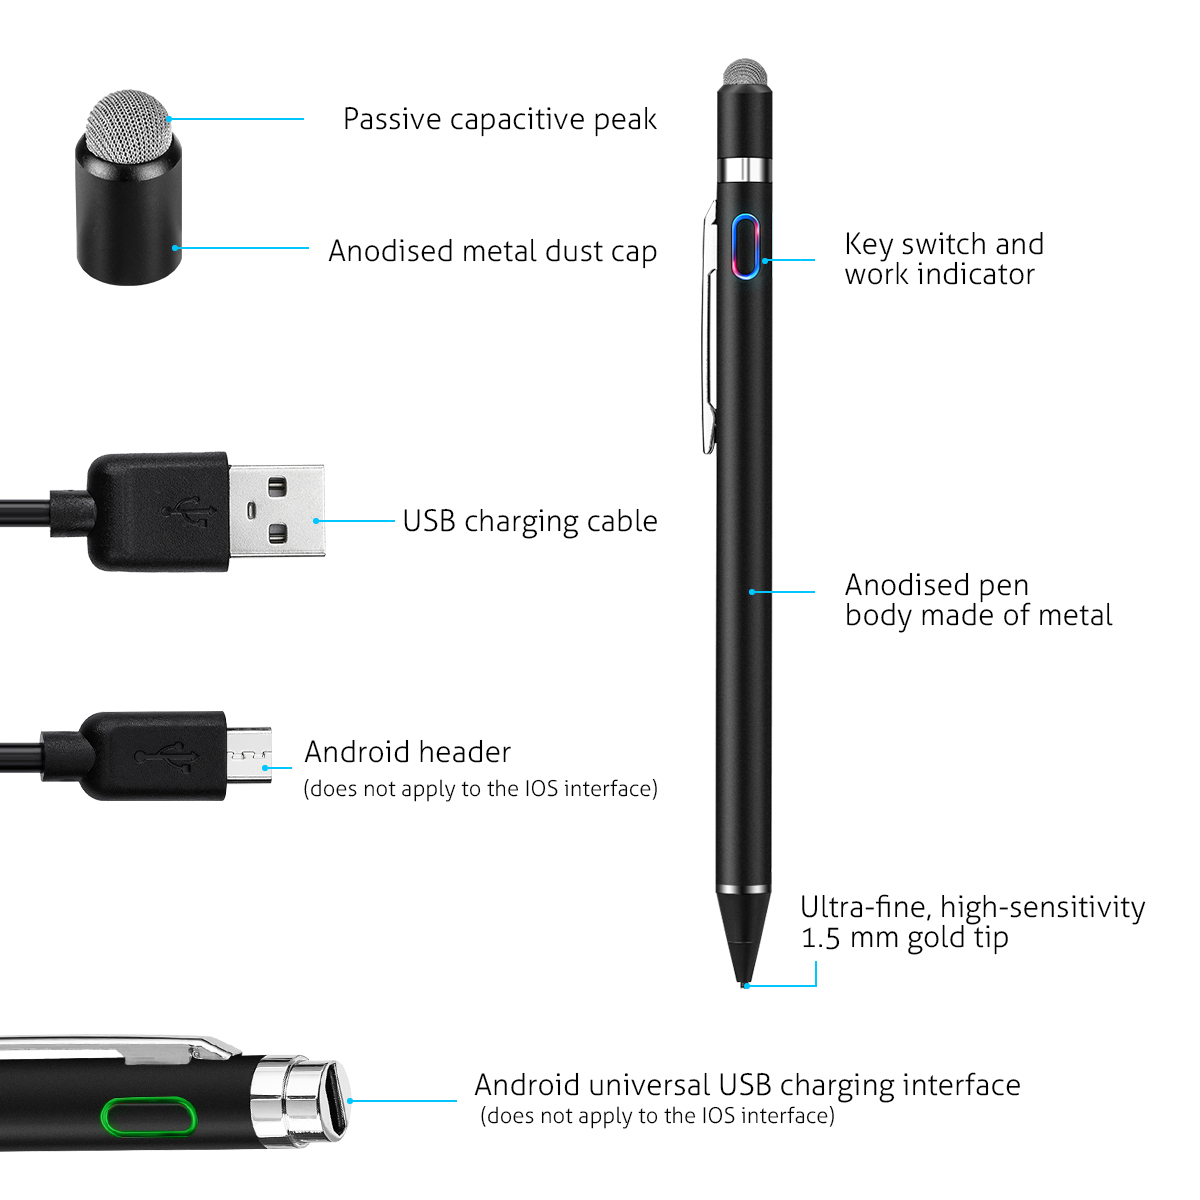 15mm-Active-Capacitive-Touch-Screen-Stylus-Pen-For-Smart-Phone-Tablet-PC-iPhone-iPad-Samsung-Huawei-1415809